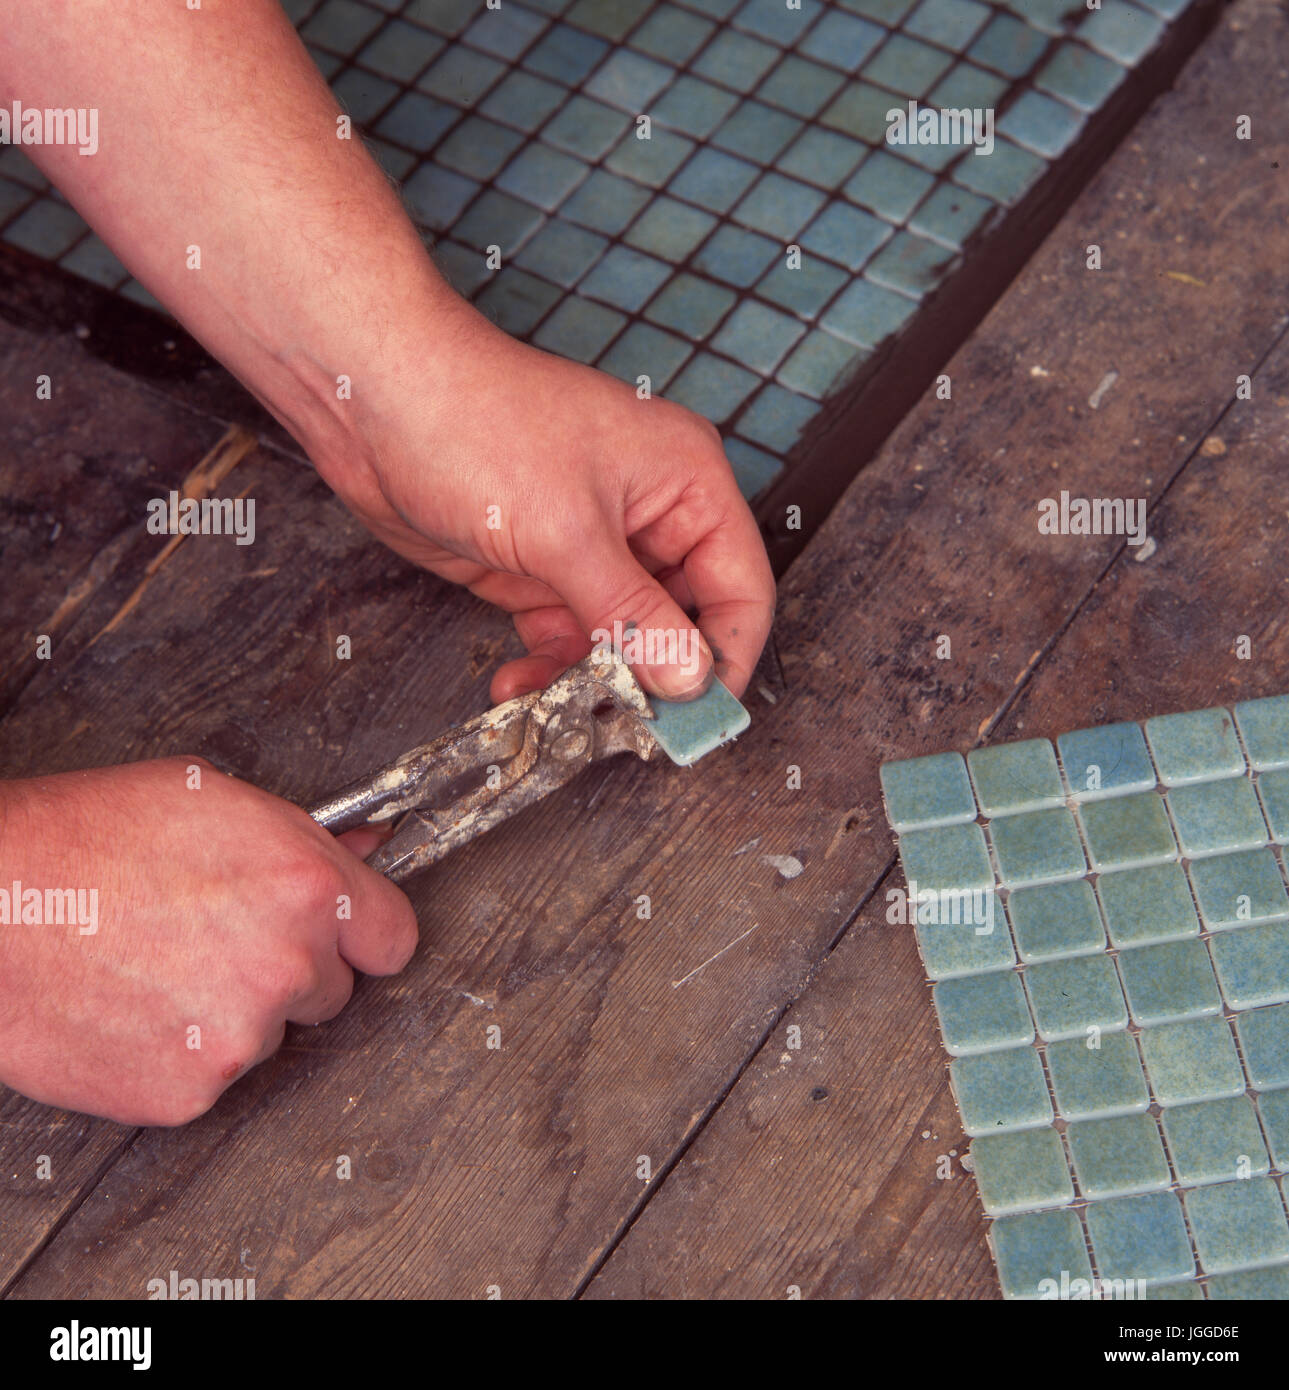 Renovating fireplace and hearth: Fitting mosaic tile sheets Stock Photo